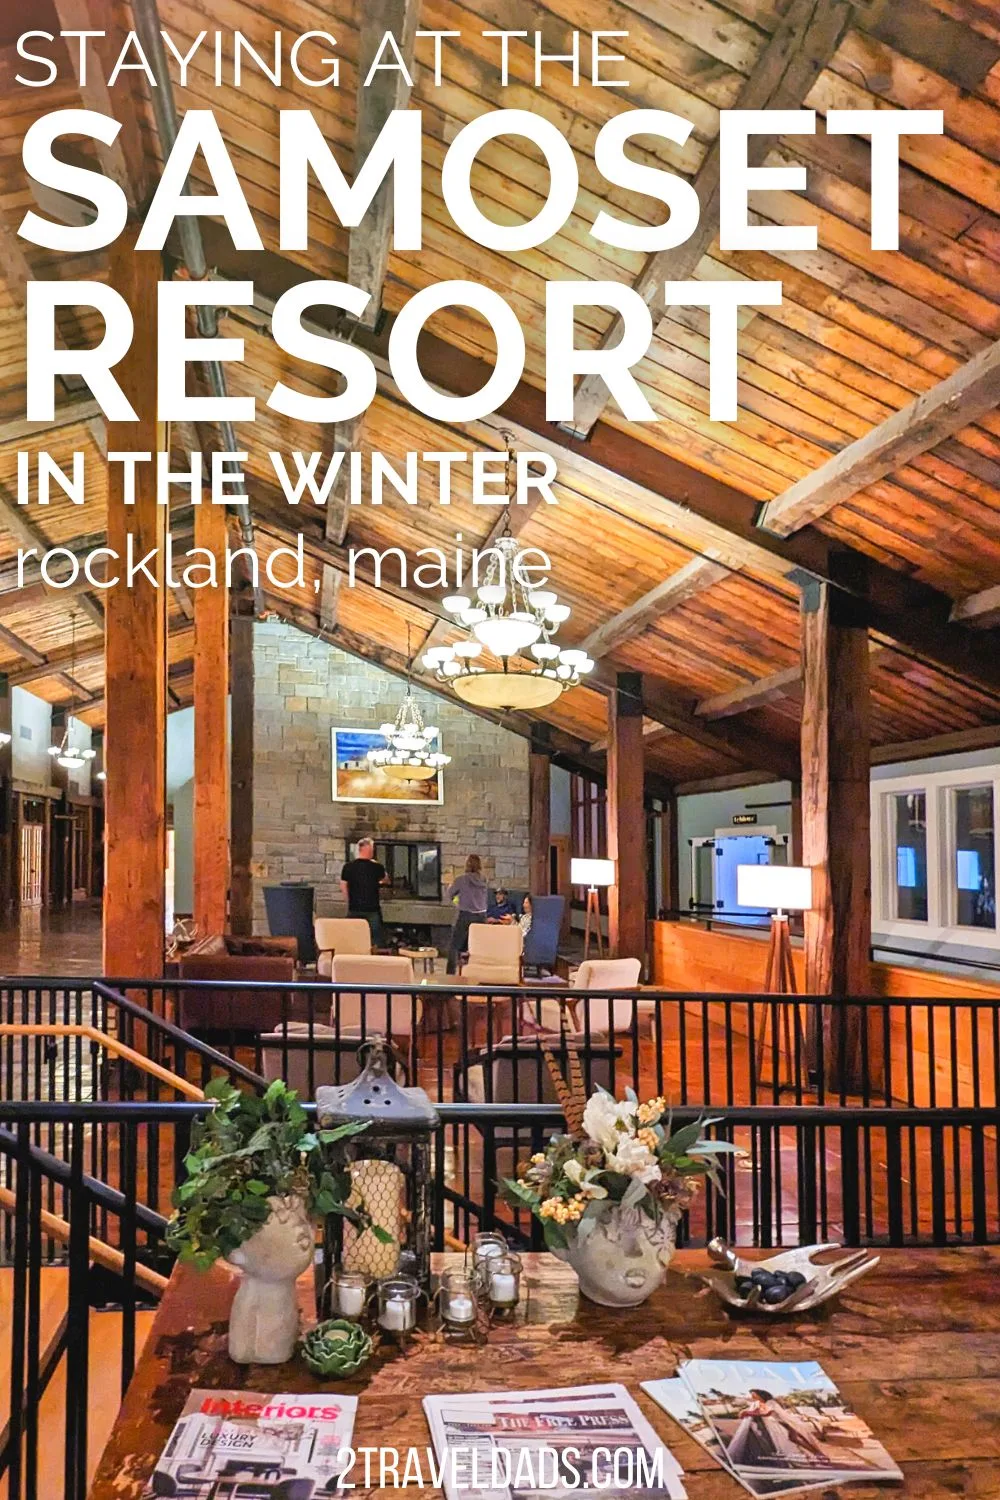 The Samoset Resort in winter is one of the best Maine experiences you can have in the cold. From beautiful accommodations to easy access to the Rockland Breakwater Lighthouse, this resort hotel is a unique and wonderful choice in MidCoast Maine.